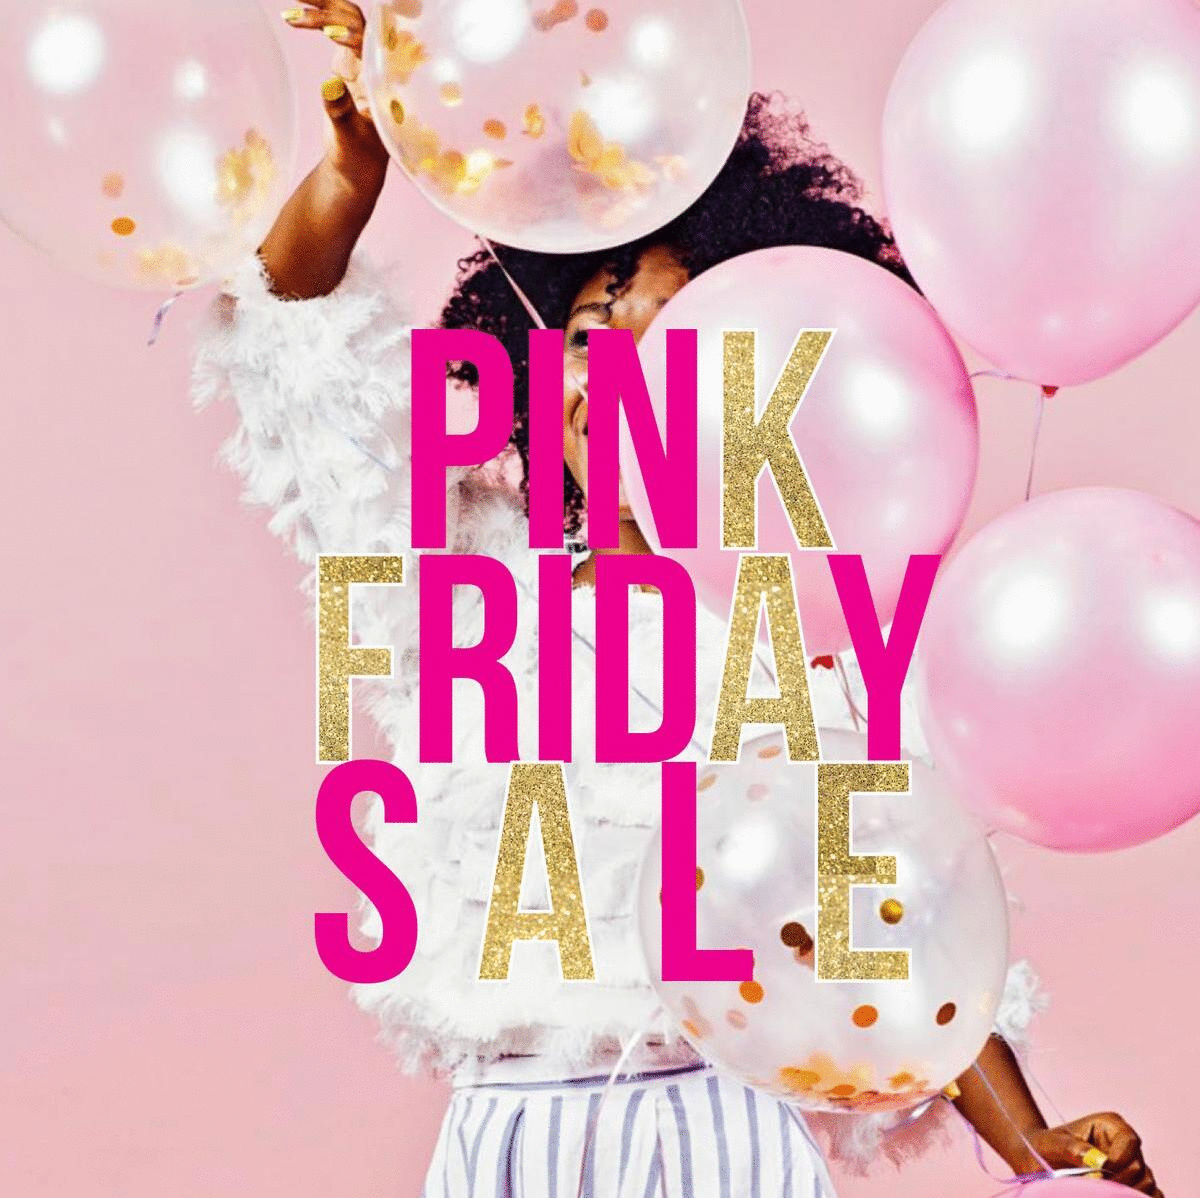 HELLO PINK Friday  Our Biggest Sale of 2020 Starts NOW